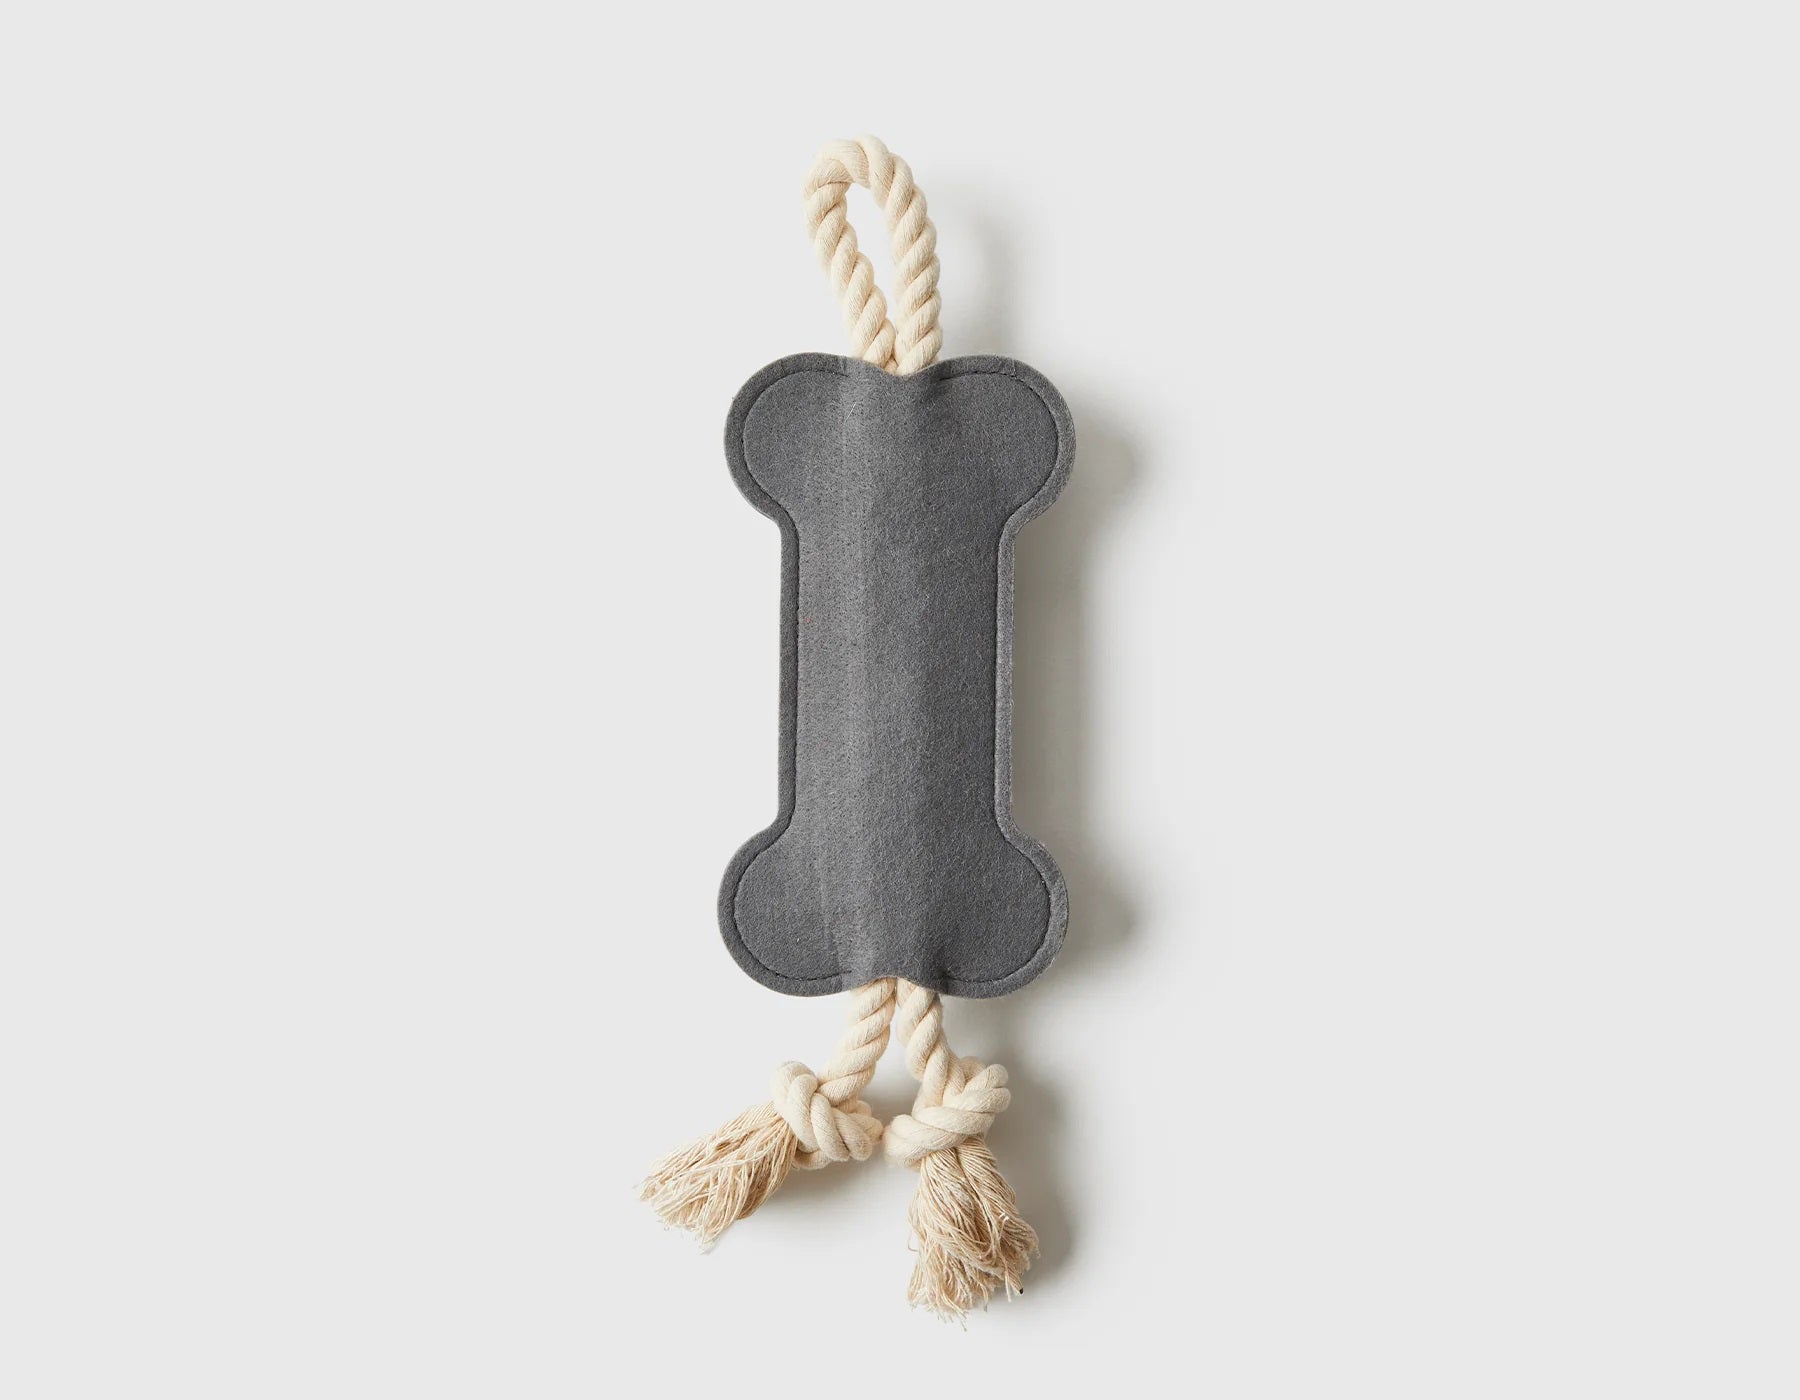 HITCH AND BONE ROPE DOG TOY